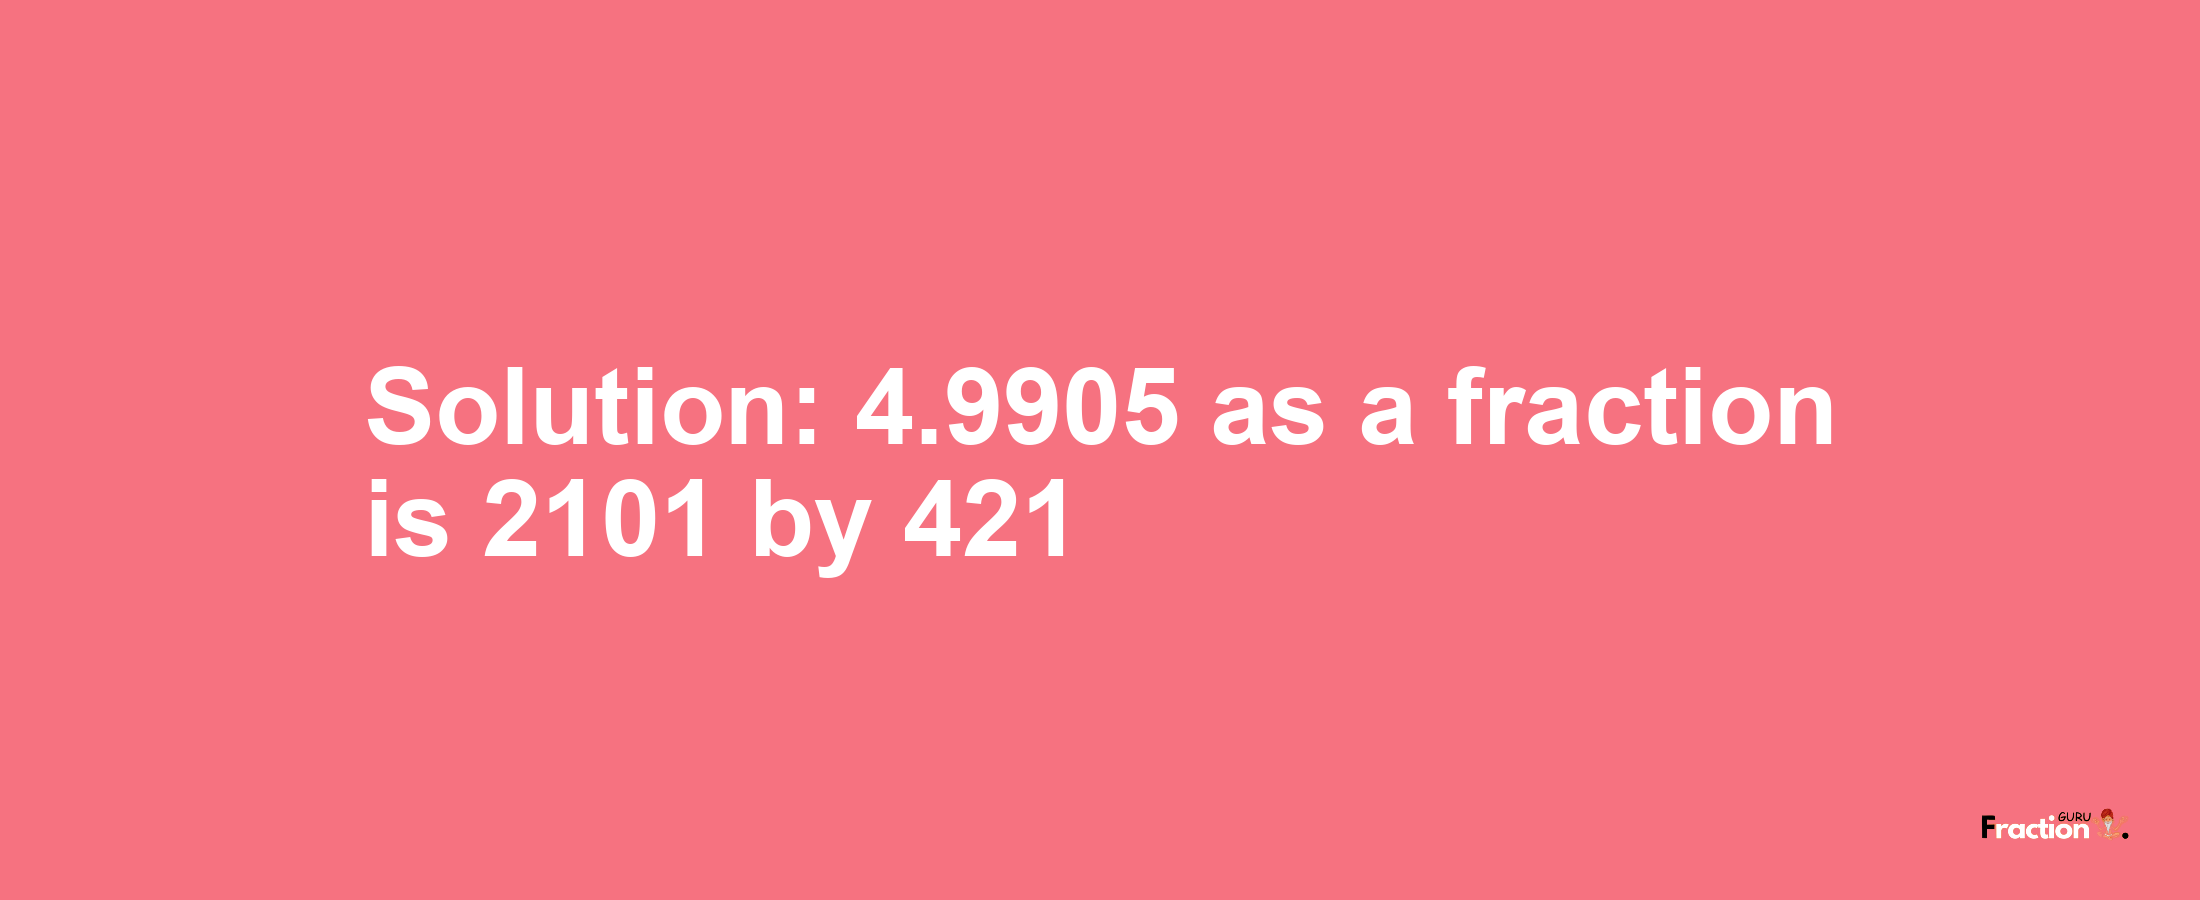 Solution:4.9905 as a fraction is 2101/421